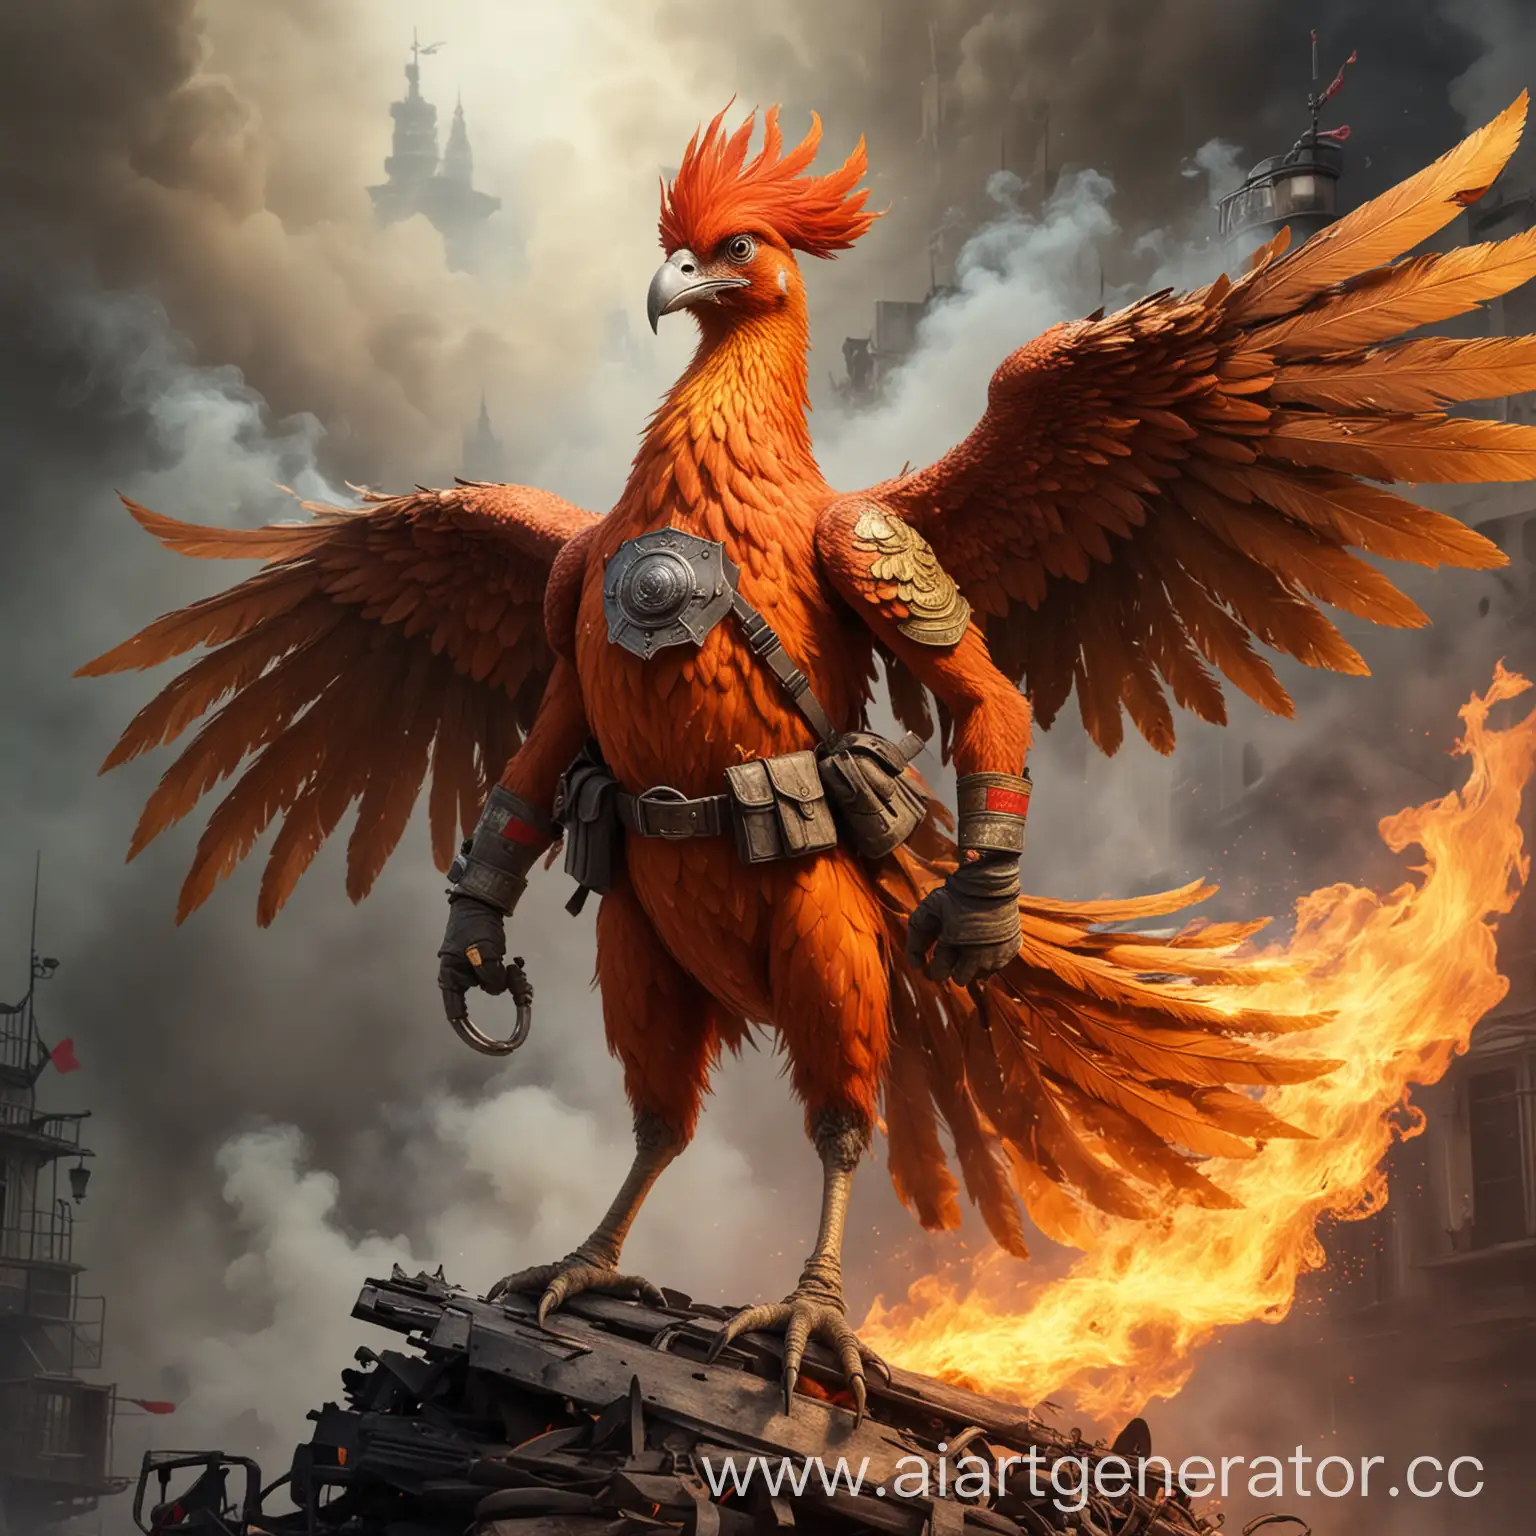 Phoenix-Bird-as-a-Fireman-Majestic-Mythical-Creature-Fighting-Flames